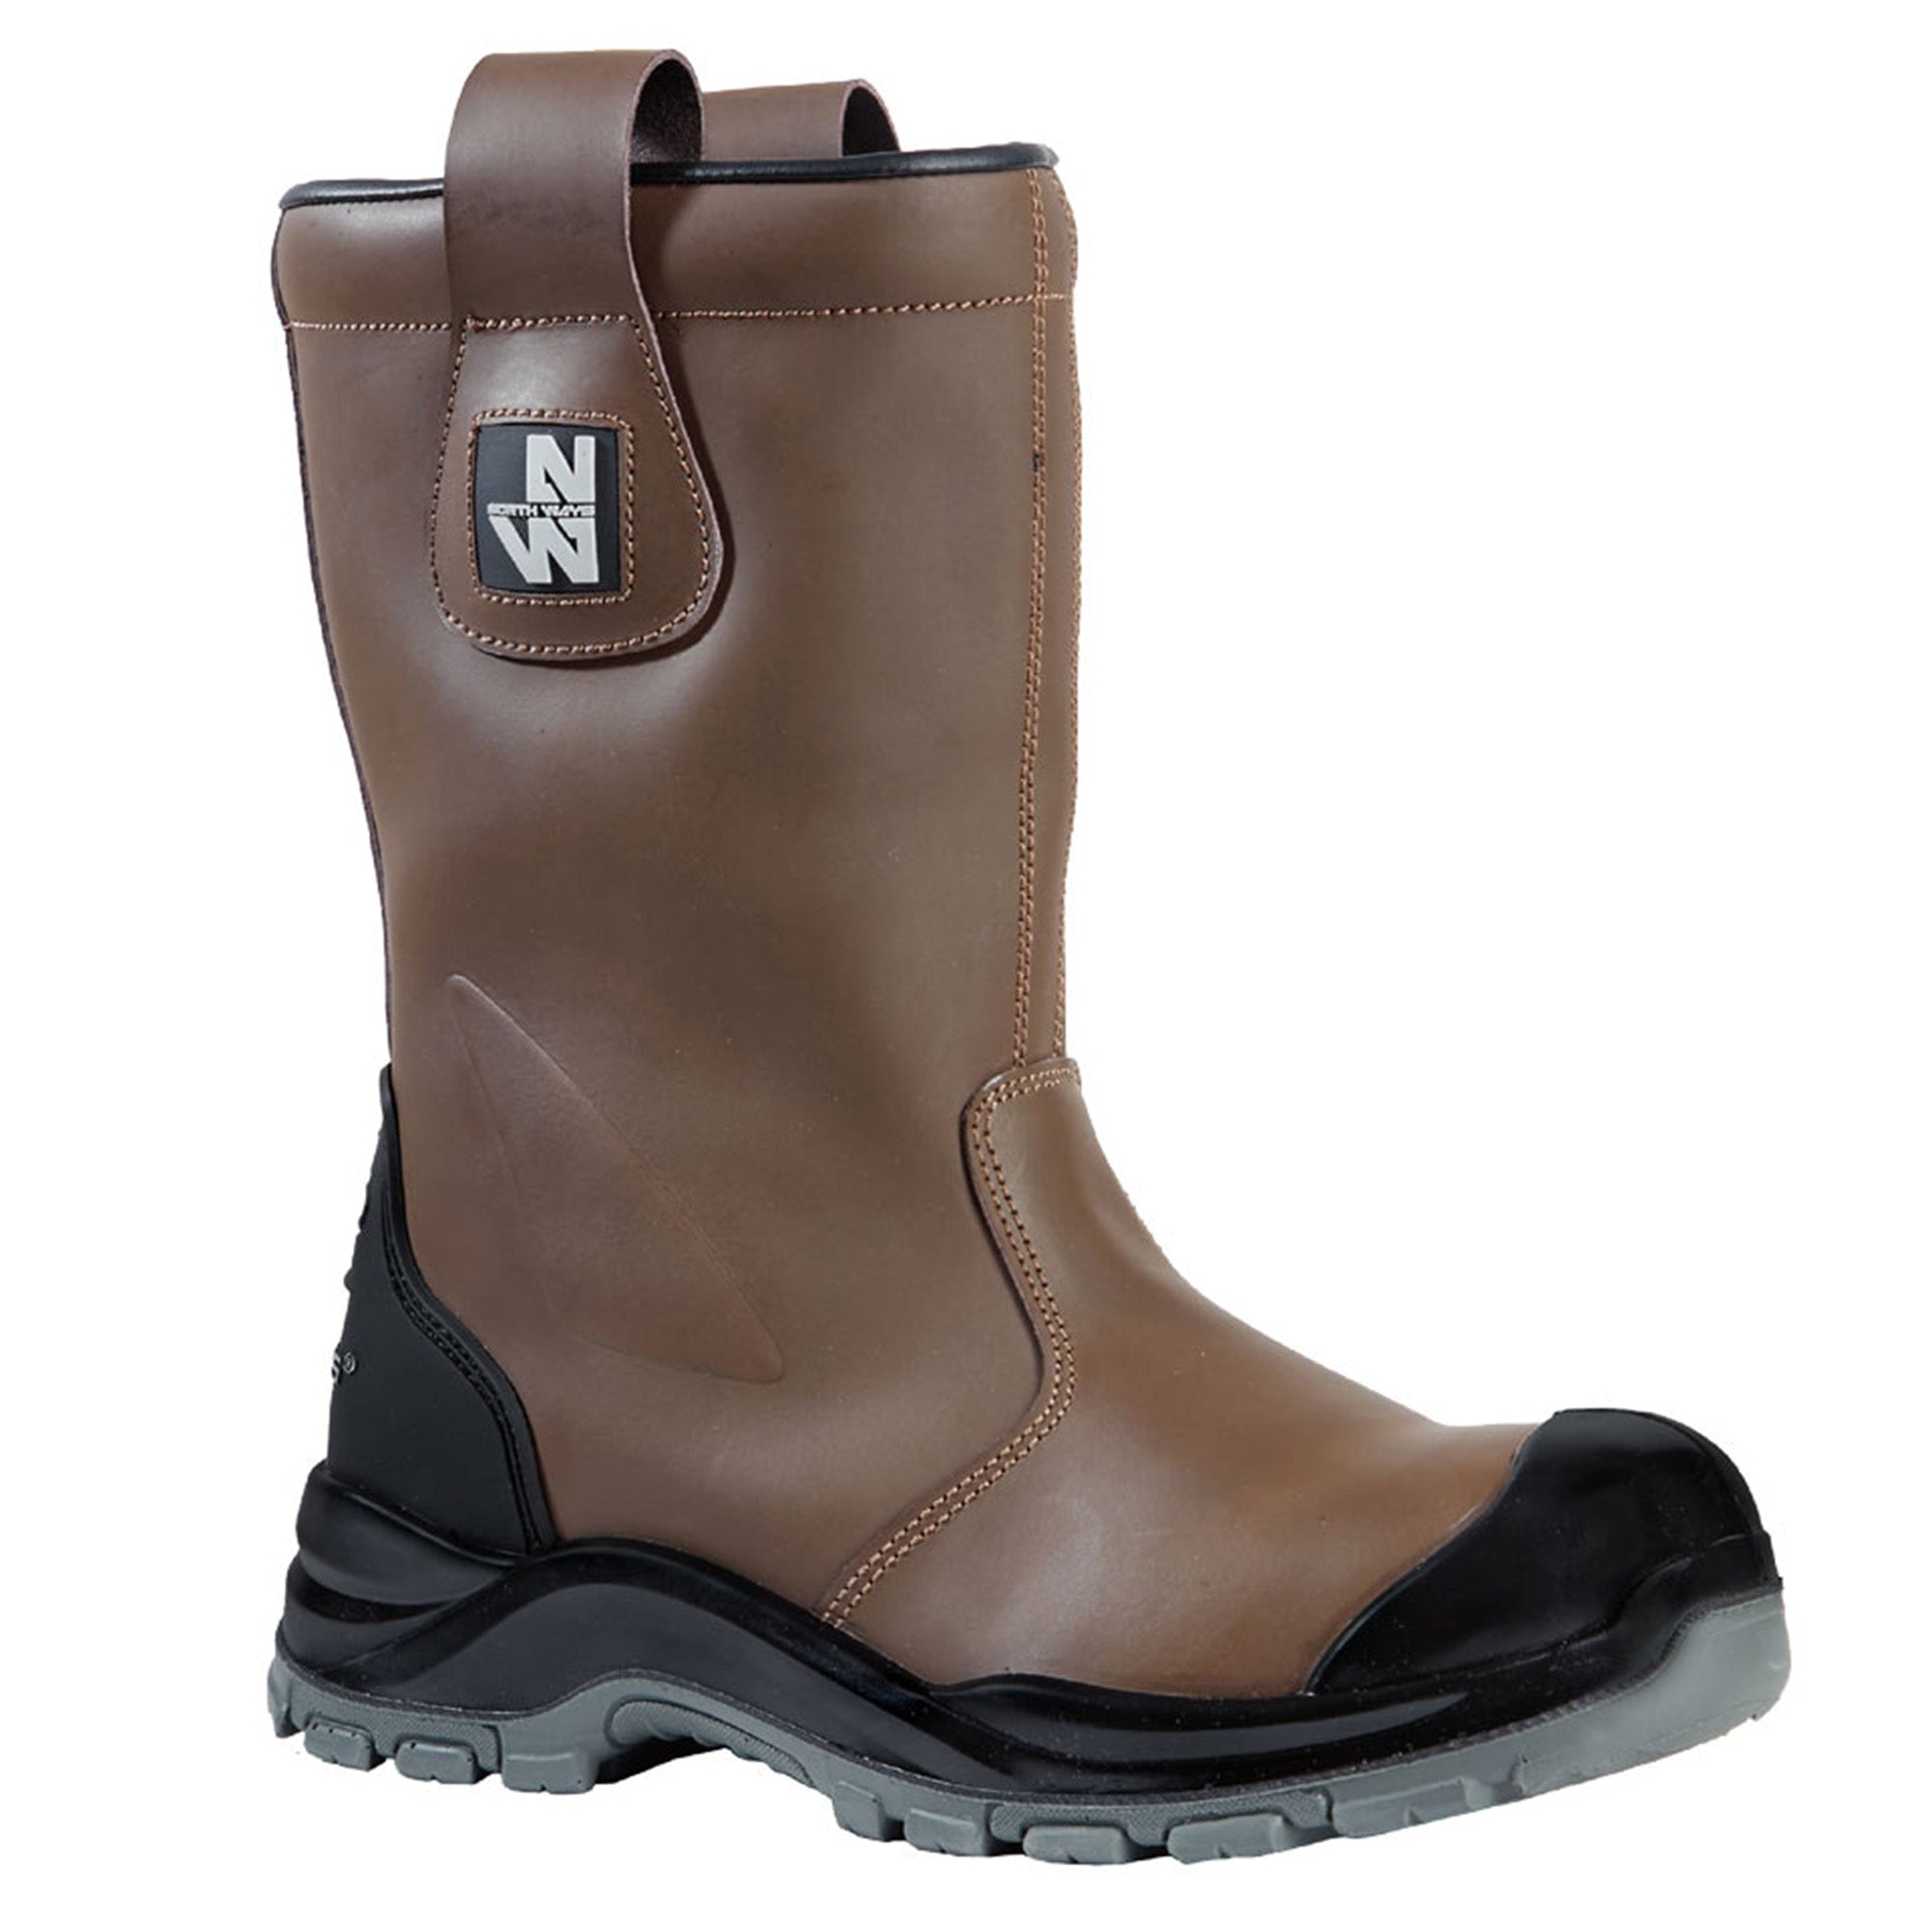 JOE - SAFETY BOOTS - 7036 | Brown